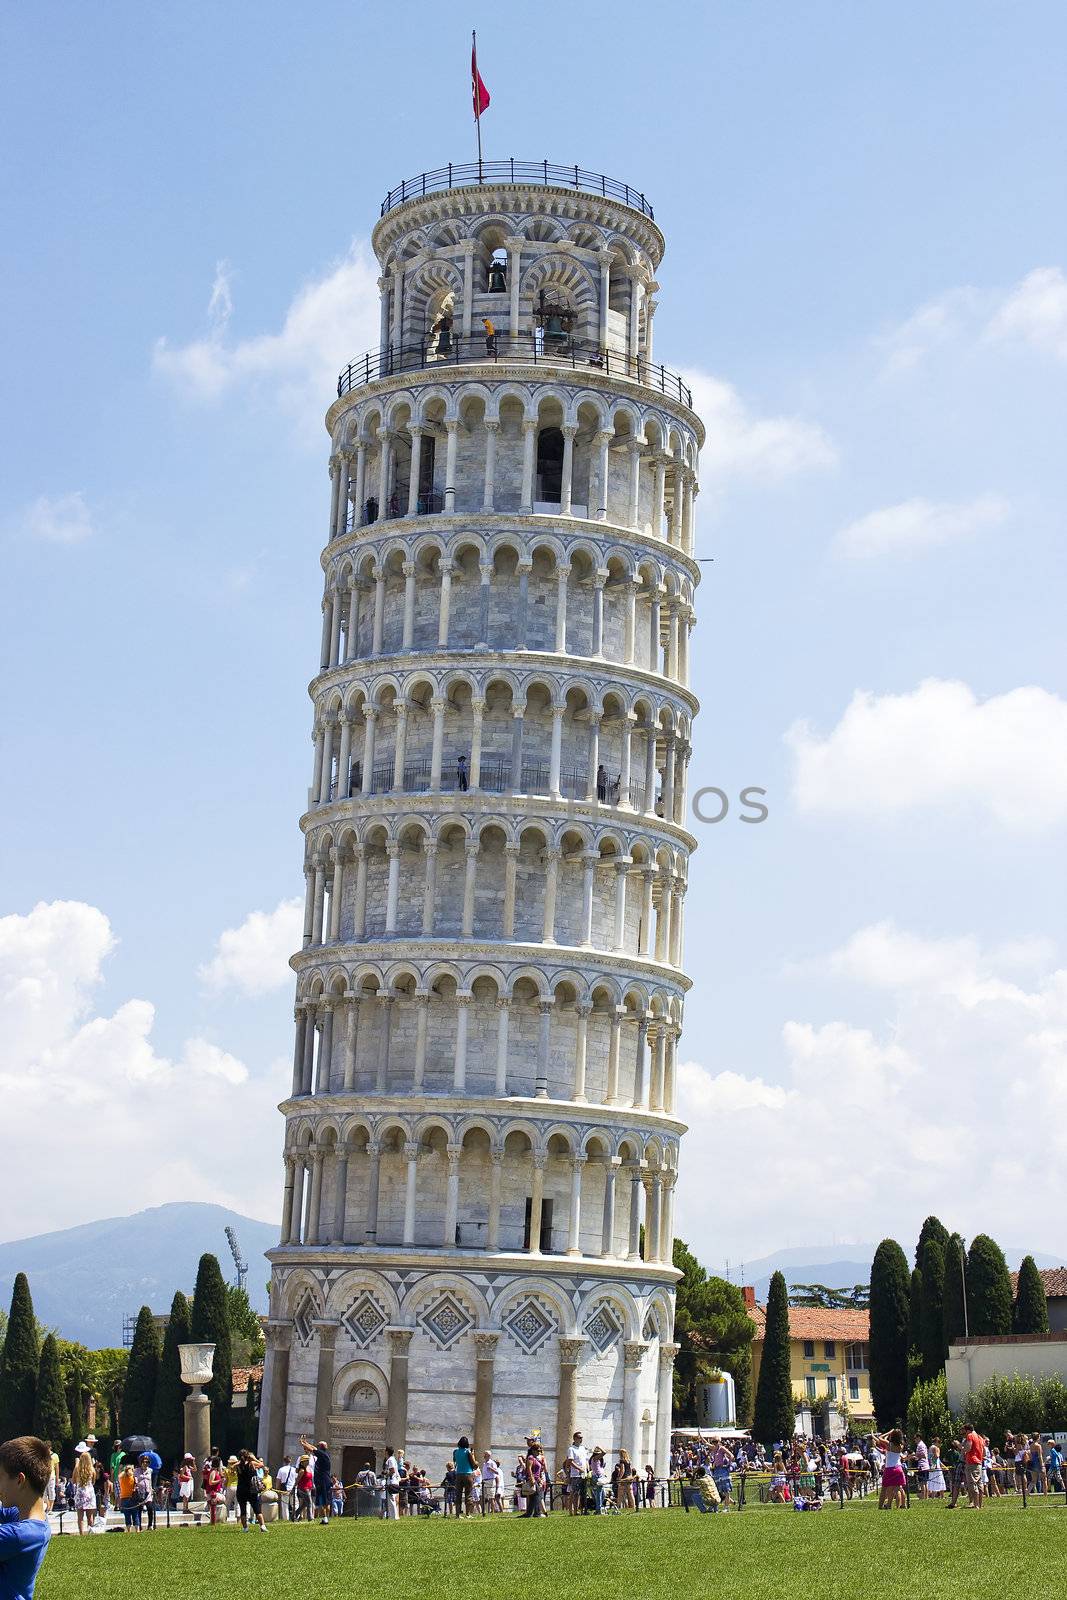 The Leaning Tower of Pisa by miradrozdowski